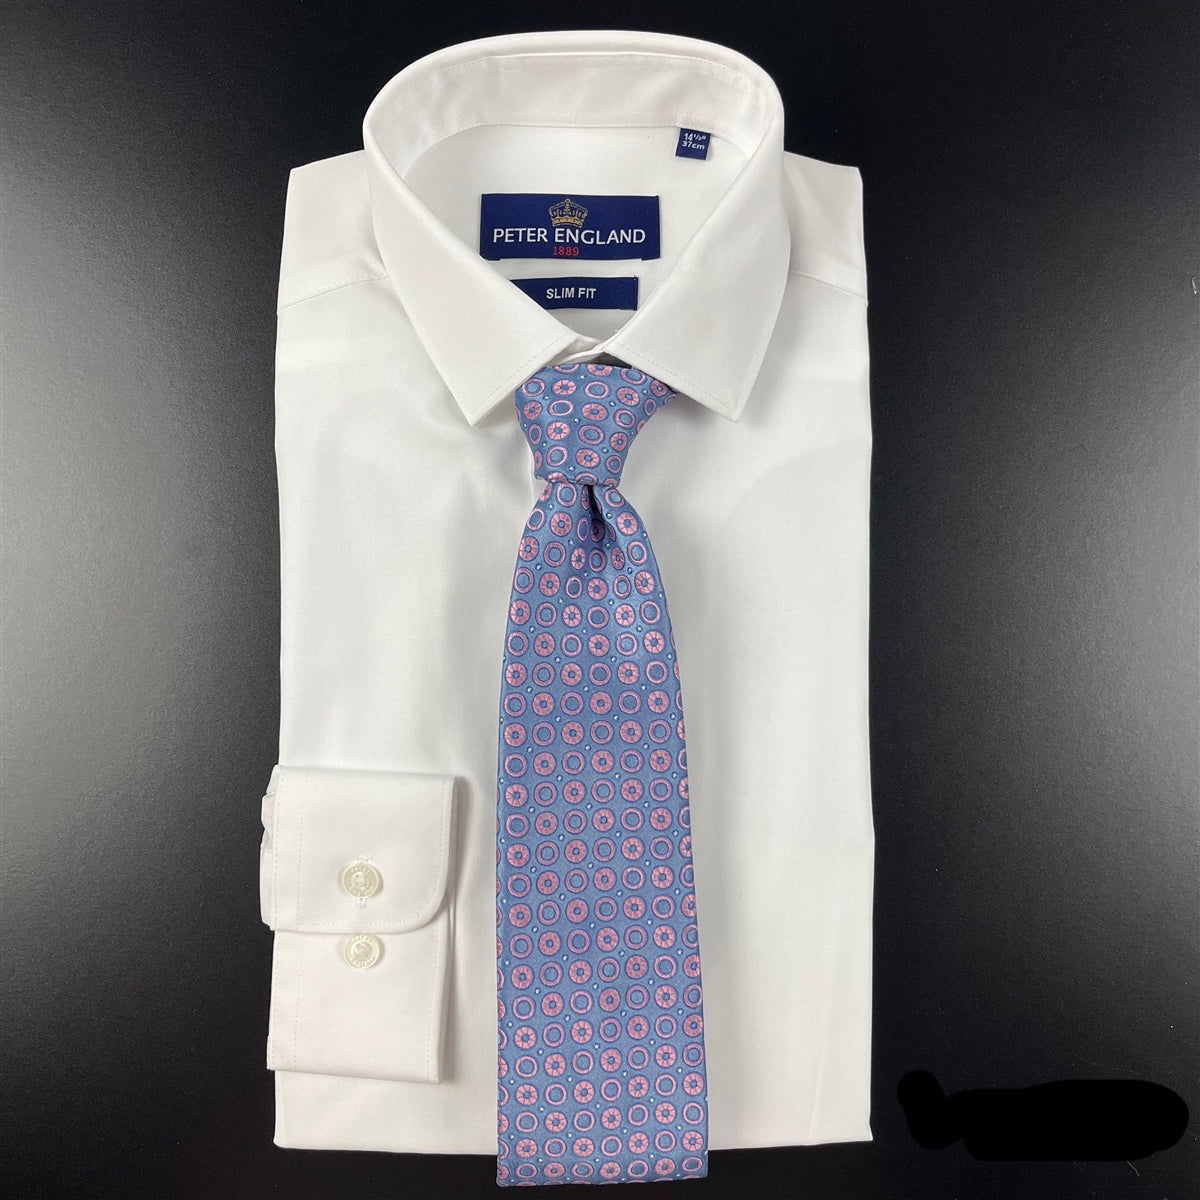 Peter England Slim Fit White Shirt with tie